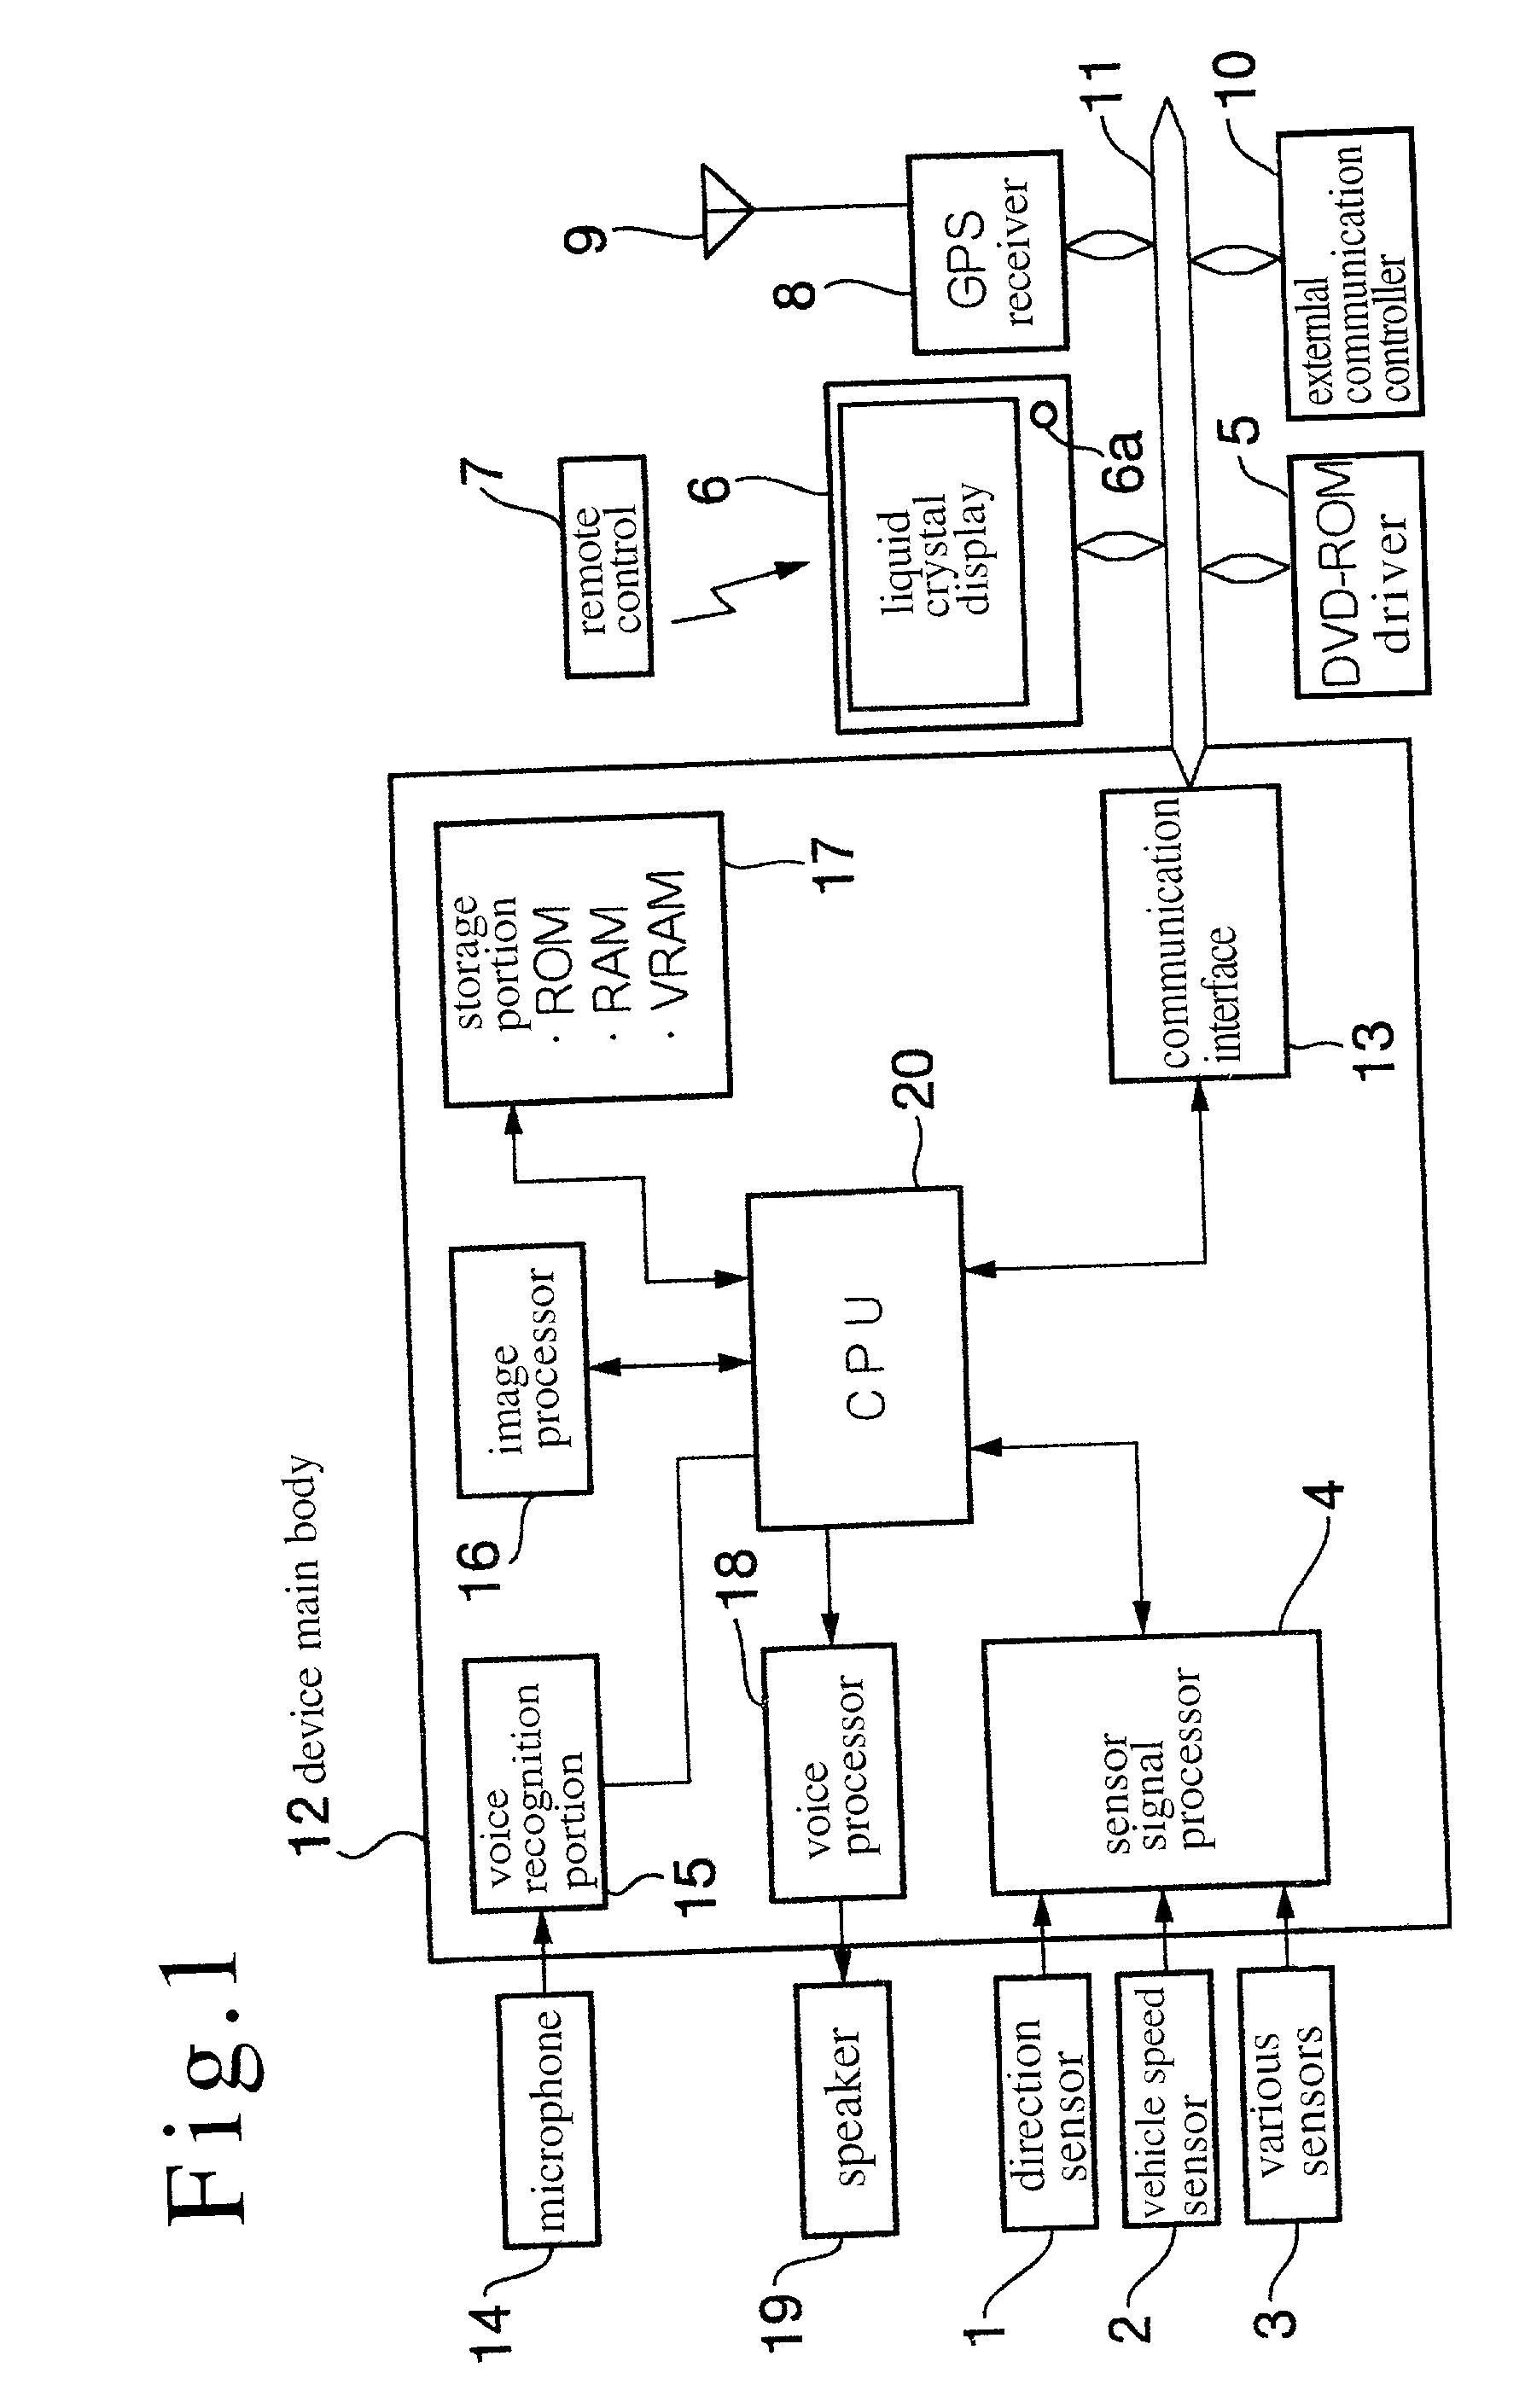 Travel direction device and travel warning direction device